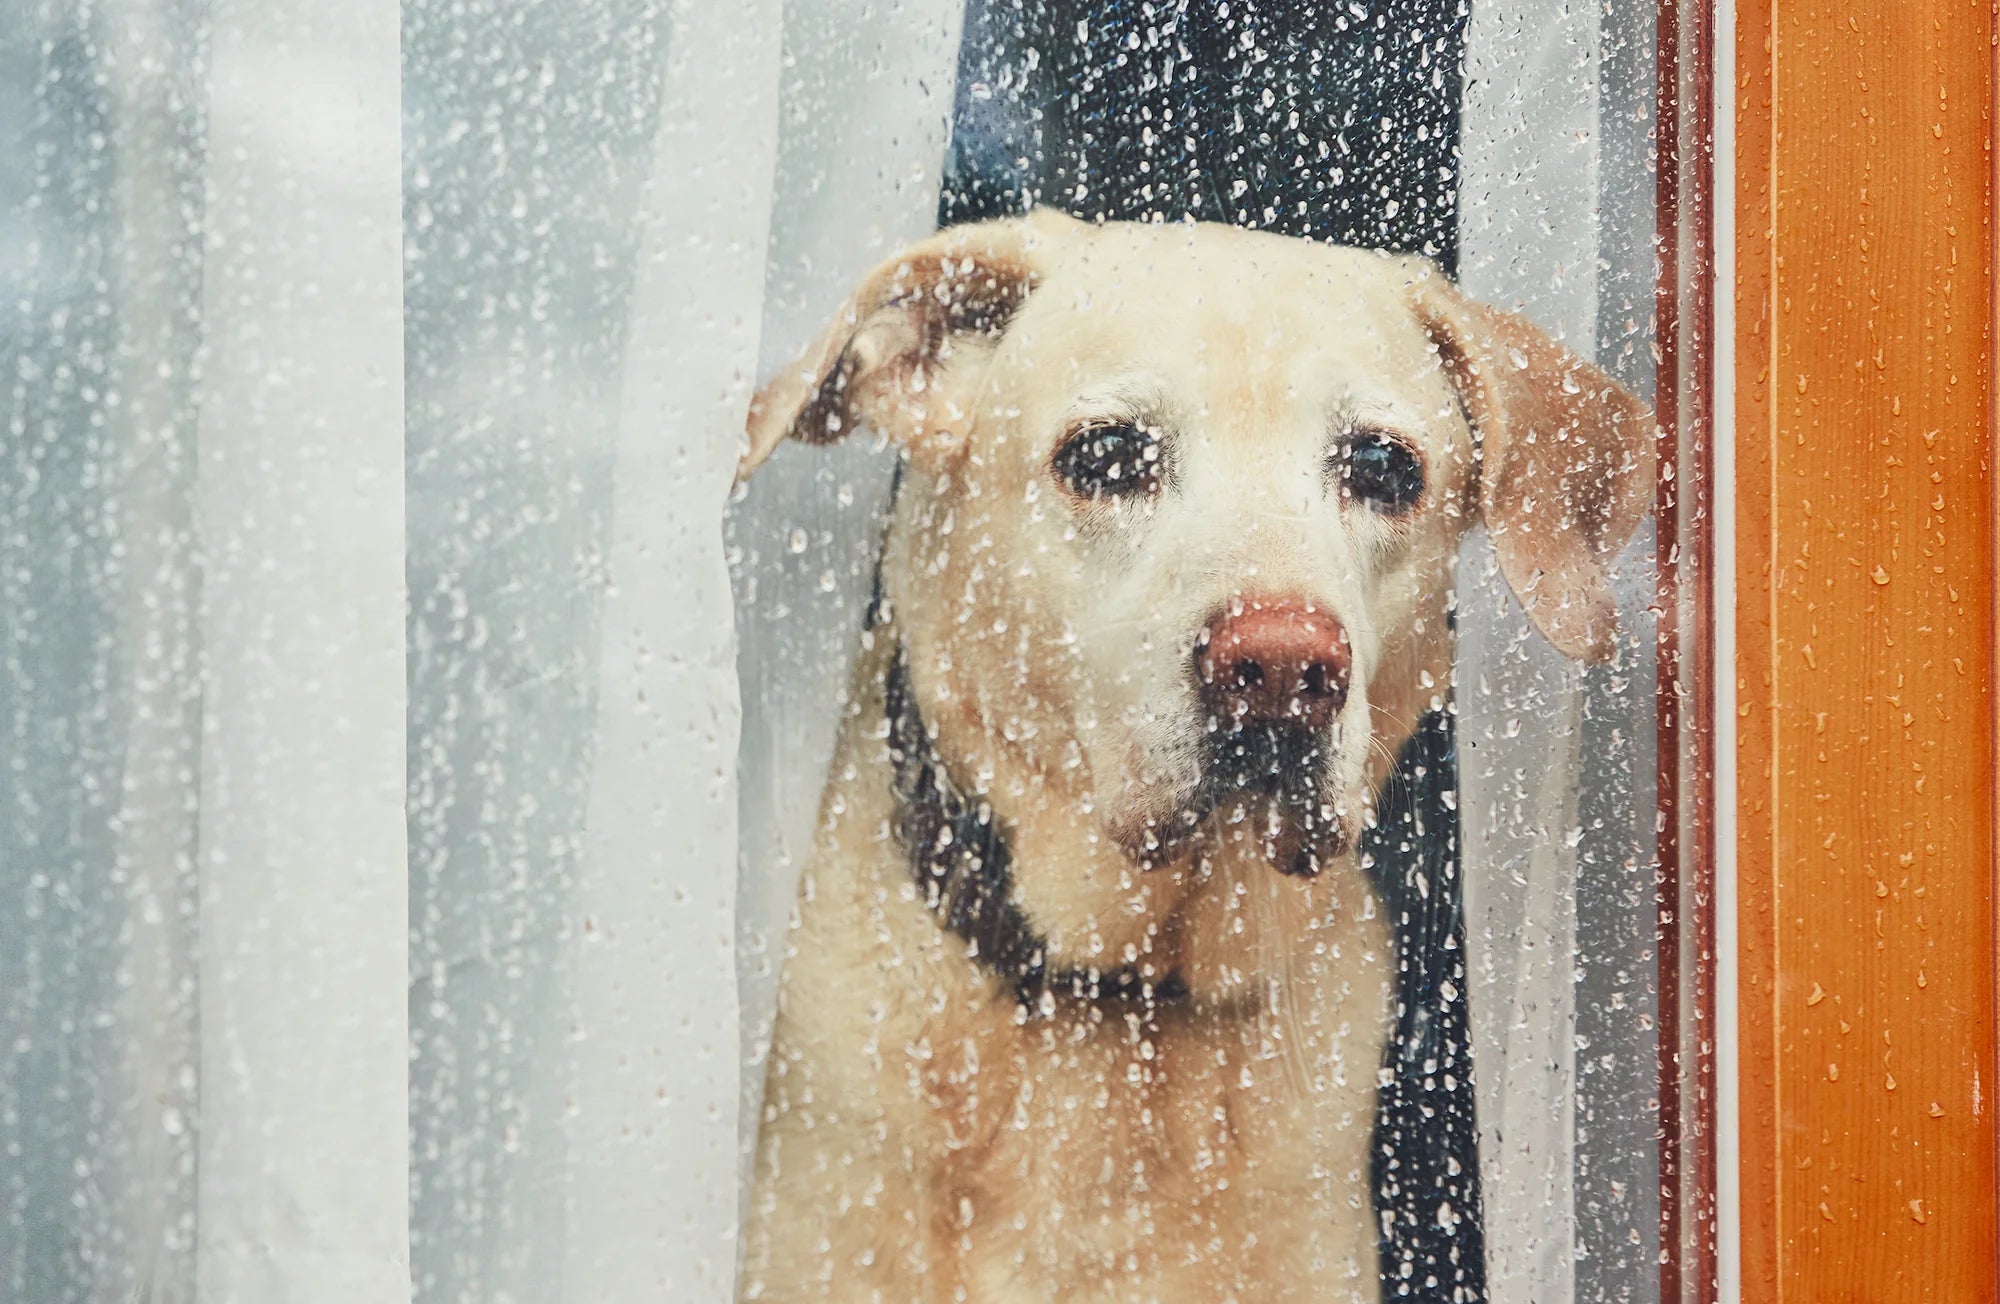 Puddle Play: Navigating Rainy Days with Your Pup and Keeping Clean with Zoomie Wipes